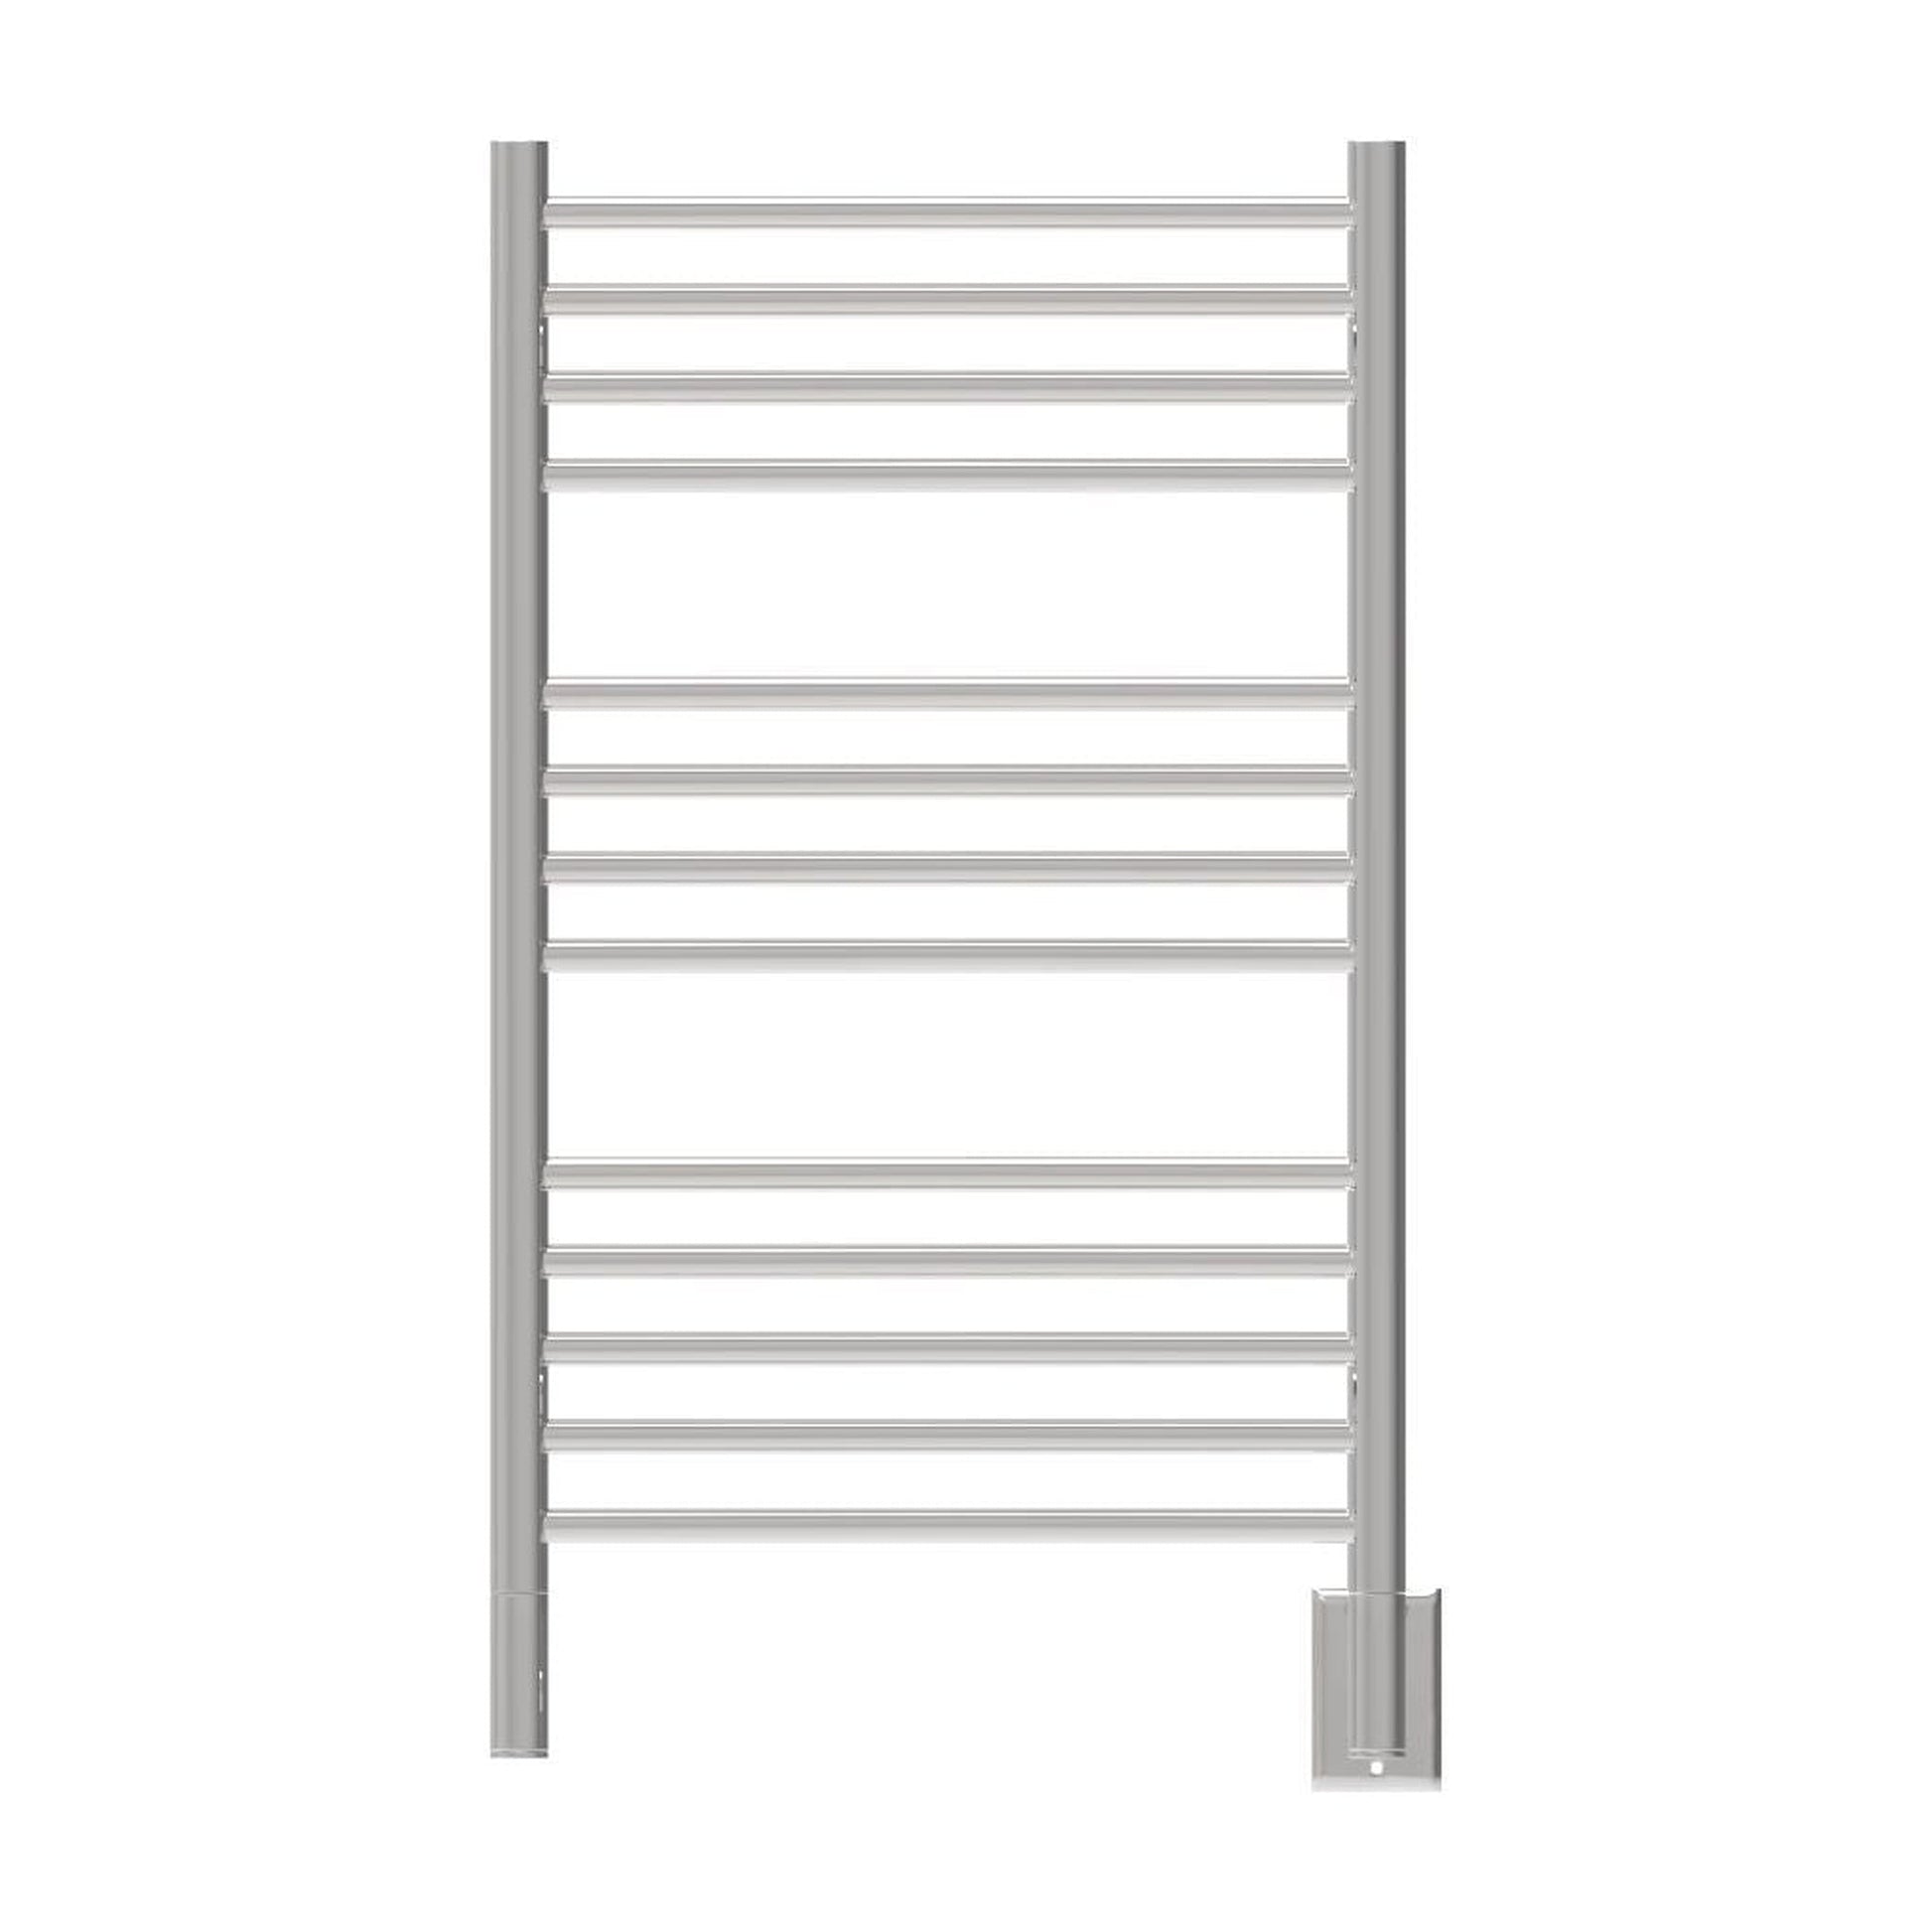 Amba Jeeves C Straight 13-Bar Polished Stainless Steel Finish Hardwired Towel Warmer